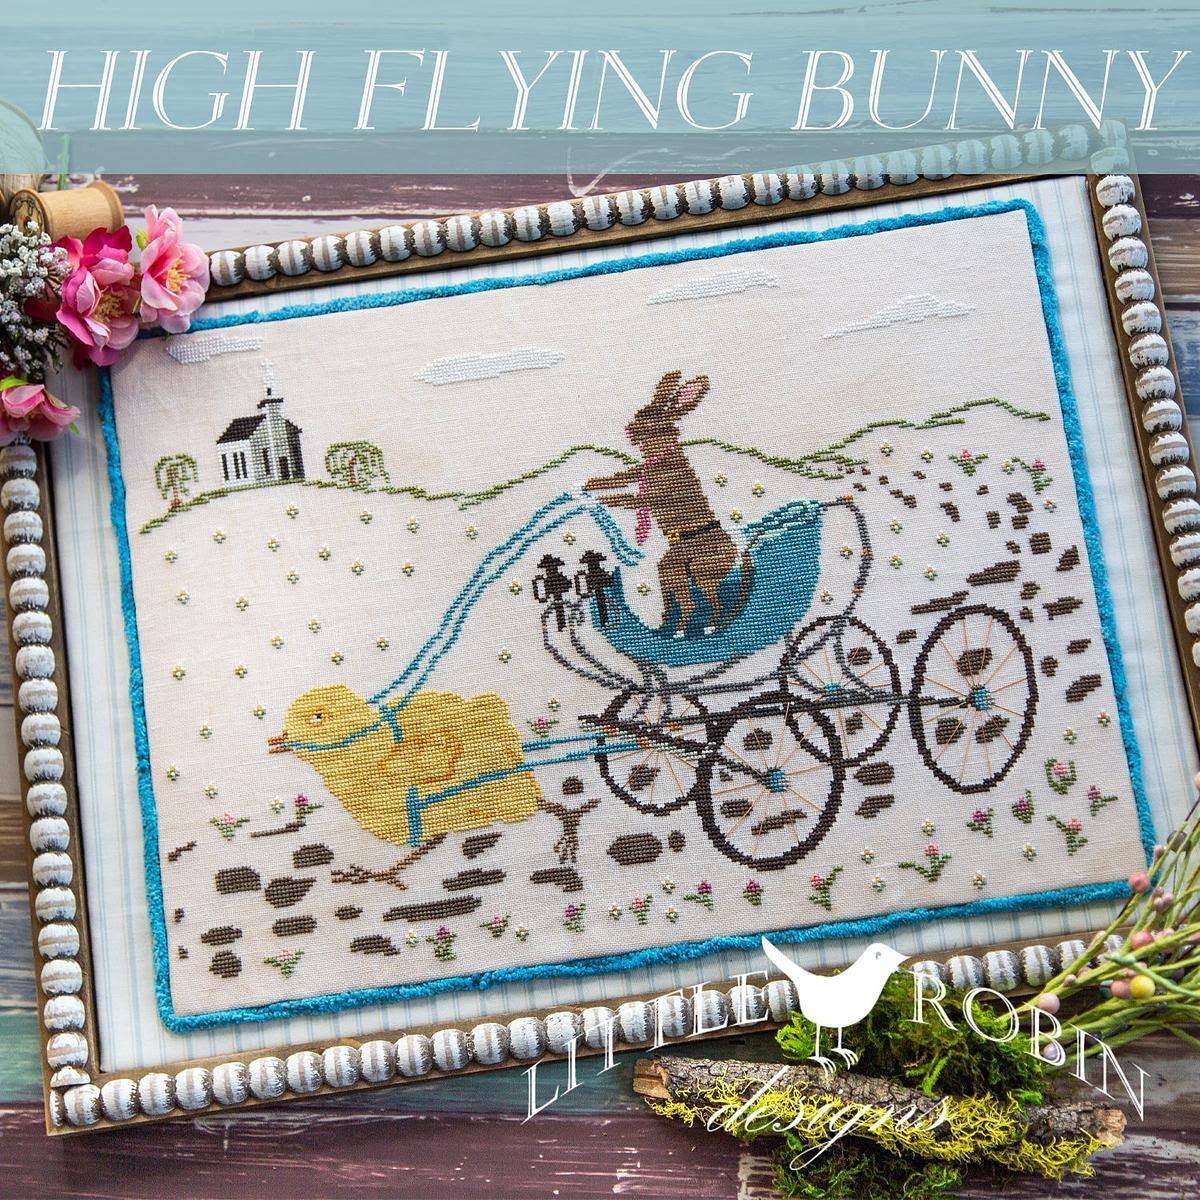 High Flying Bunny by Little Robin Designs